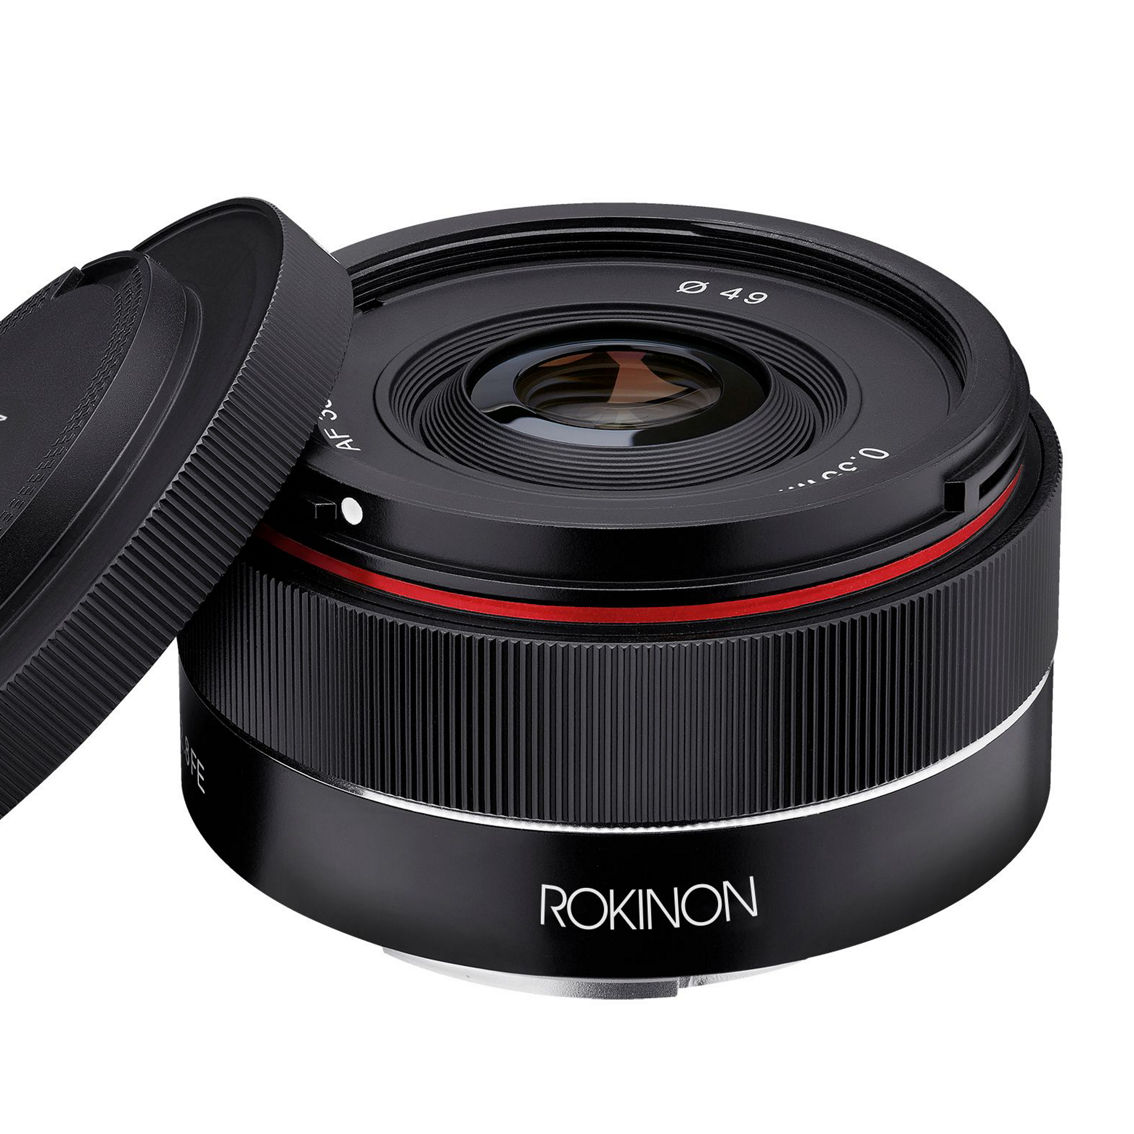 Rokinon 35mm F2.8 AF Compact Full Frame Wide Angle Lens for Sony E - Image 3 of 5